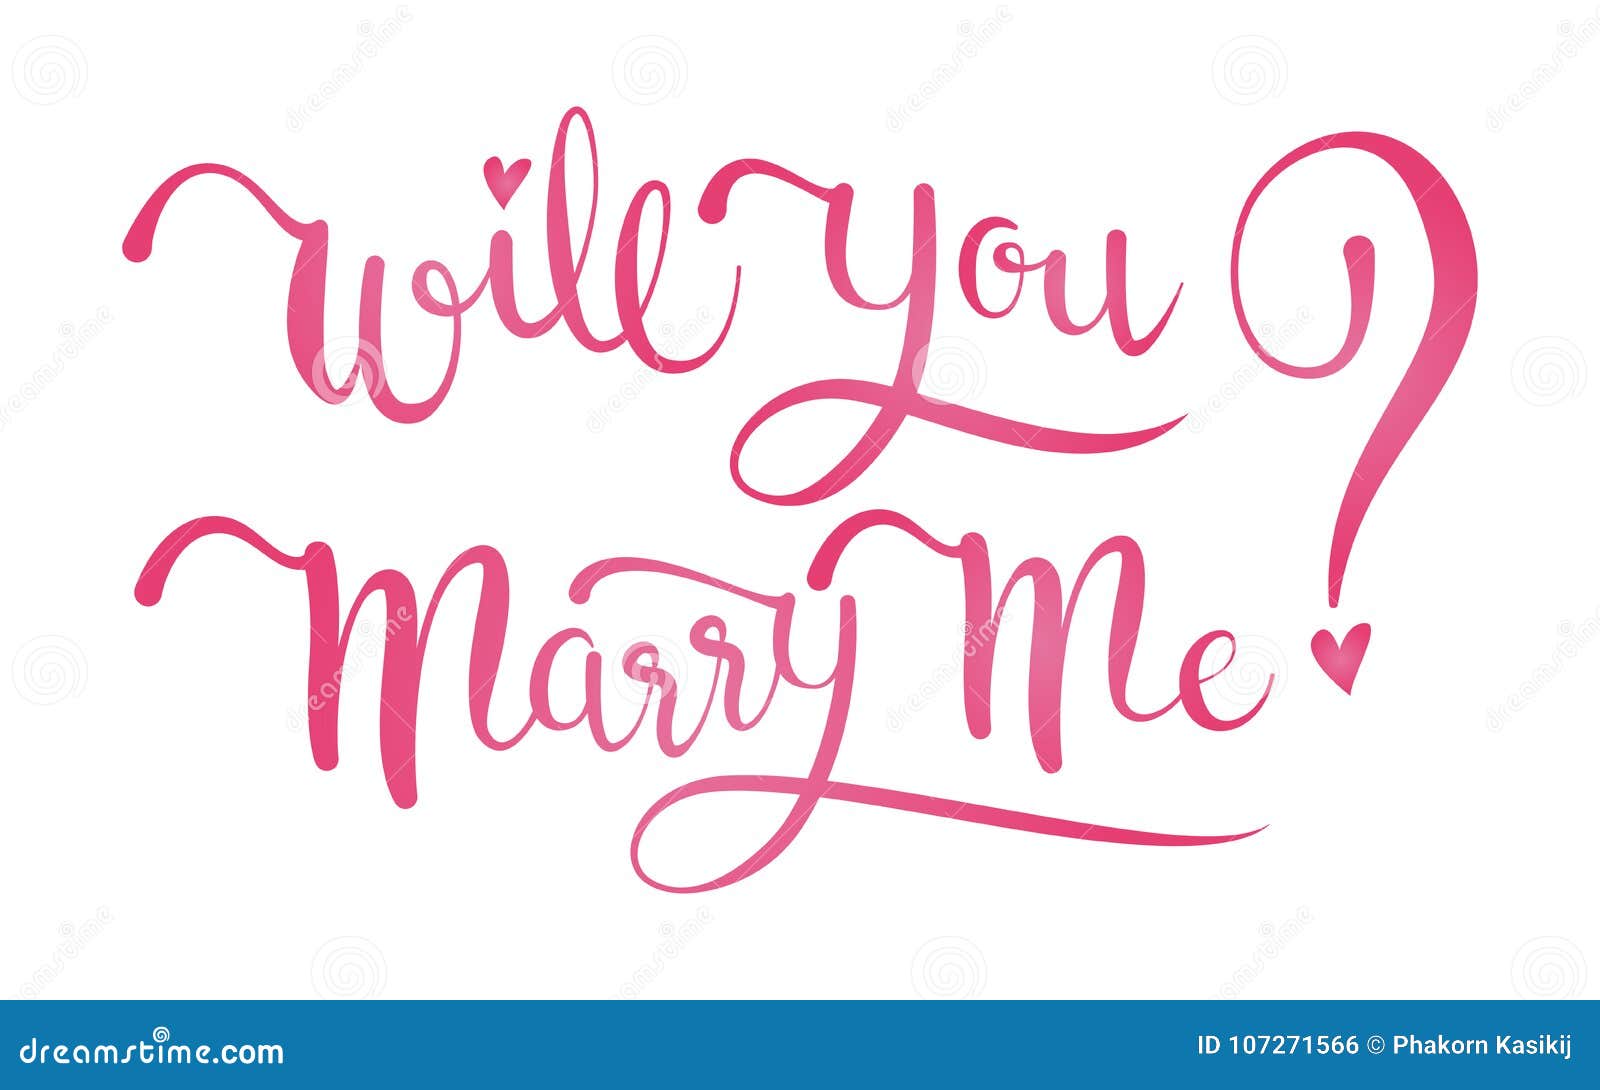 will you marry me calligraphy.